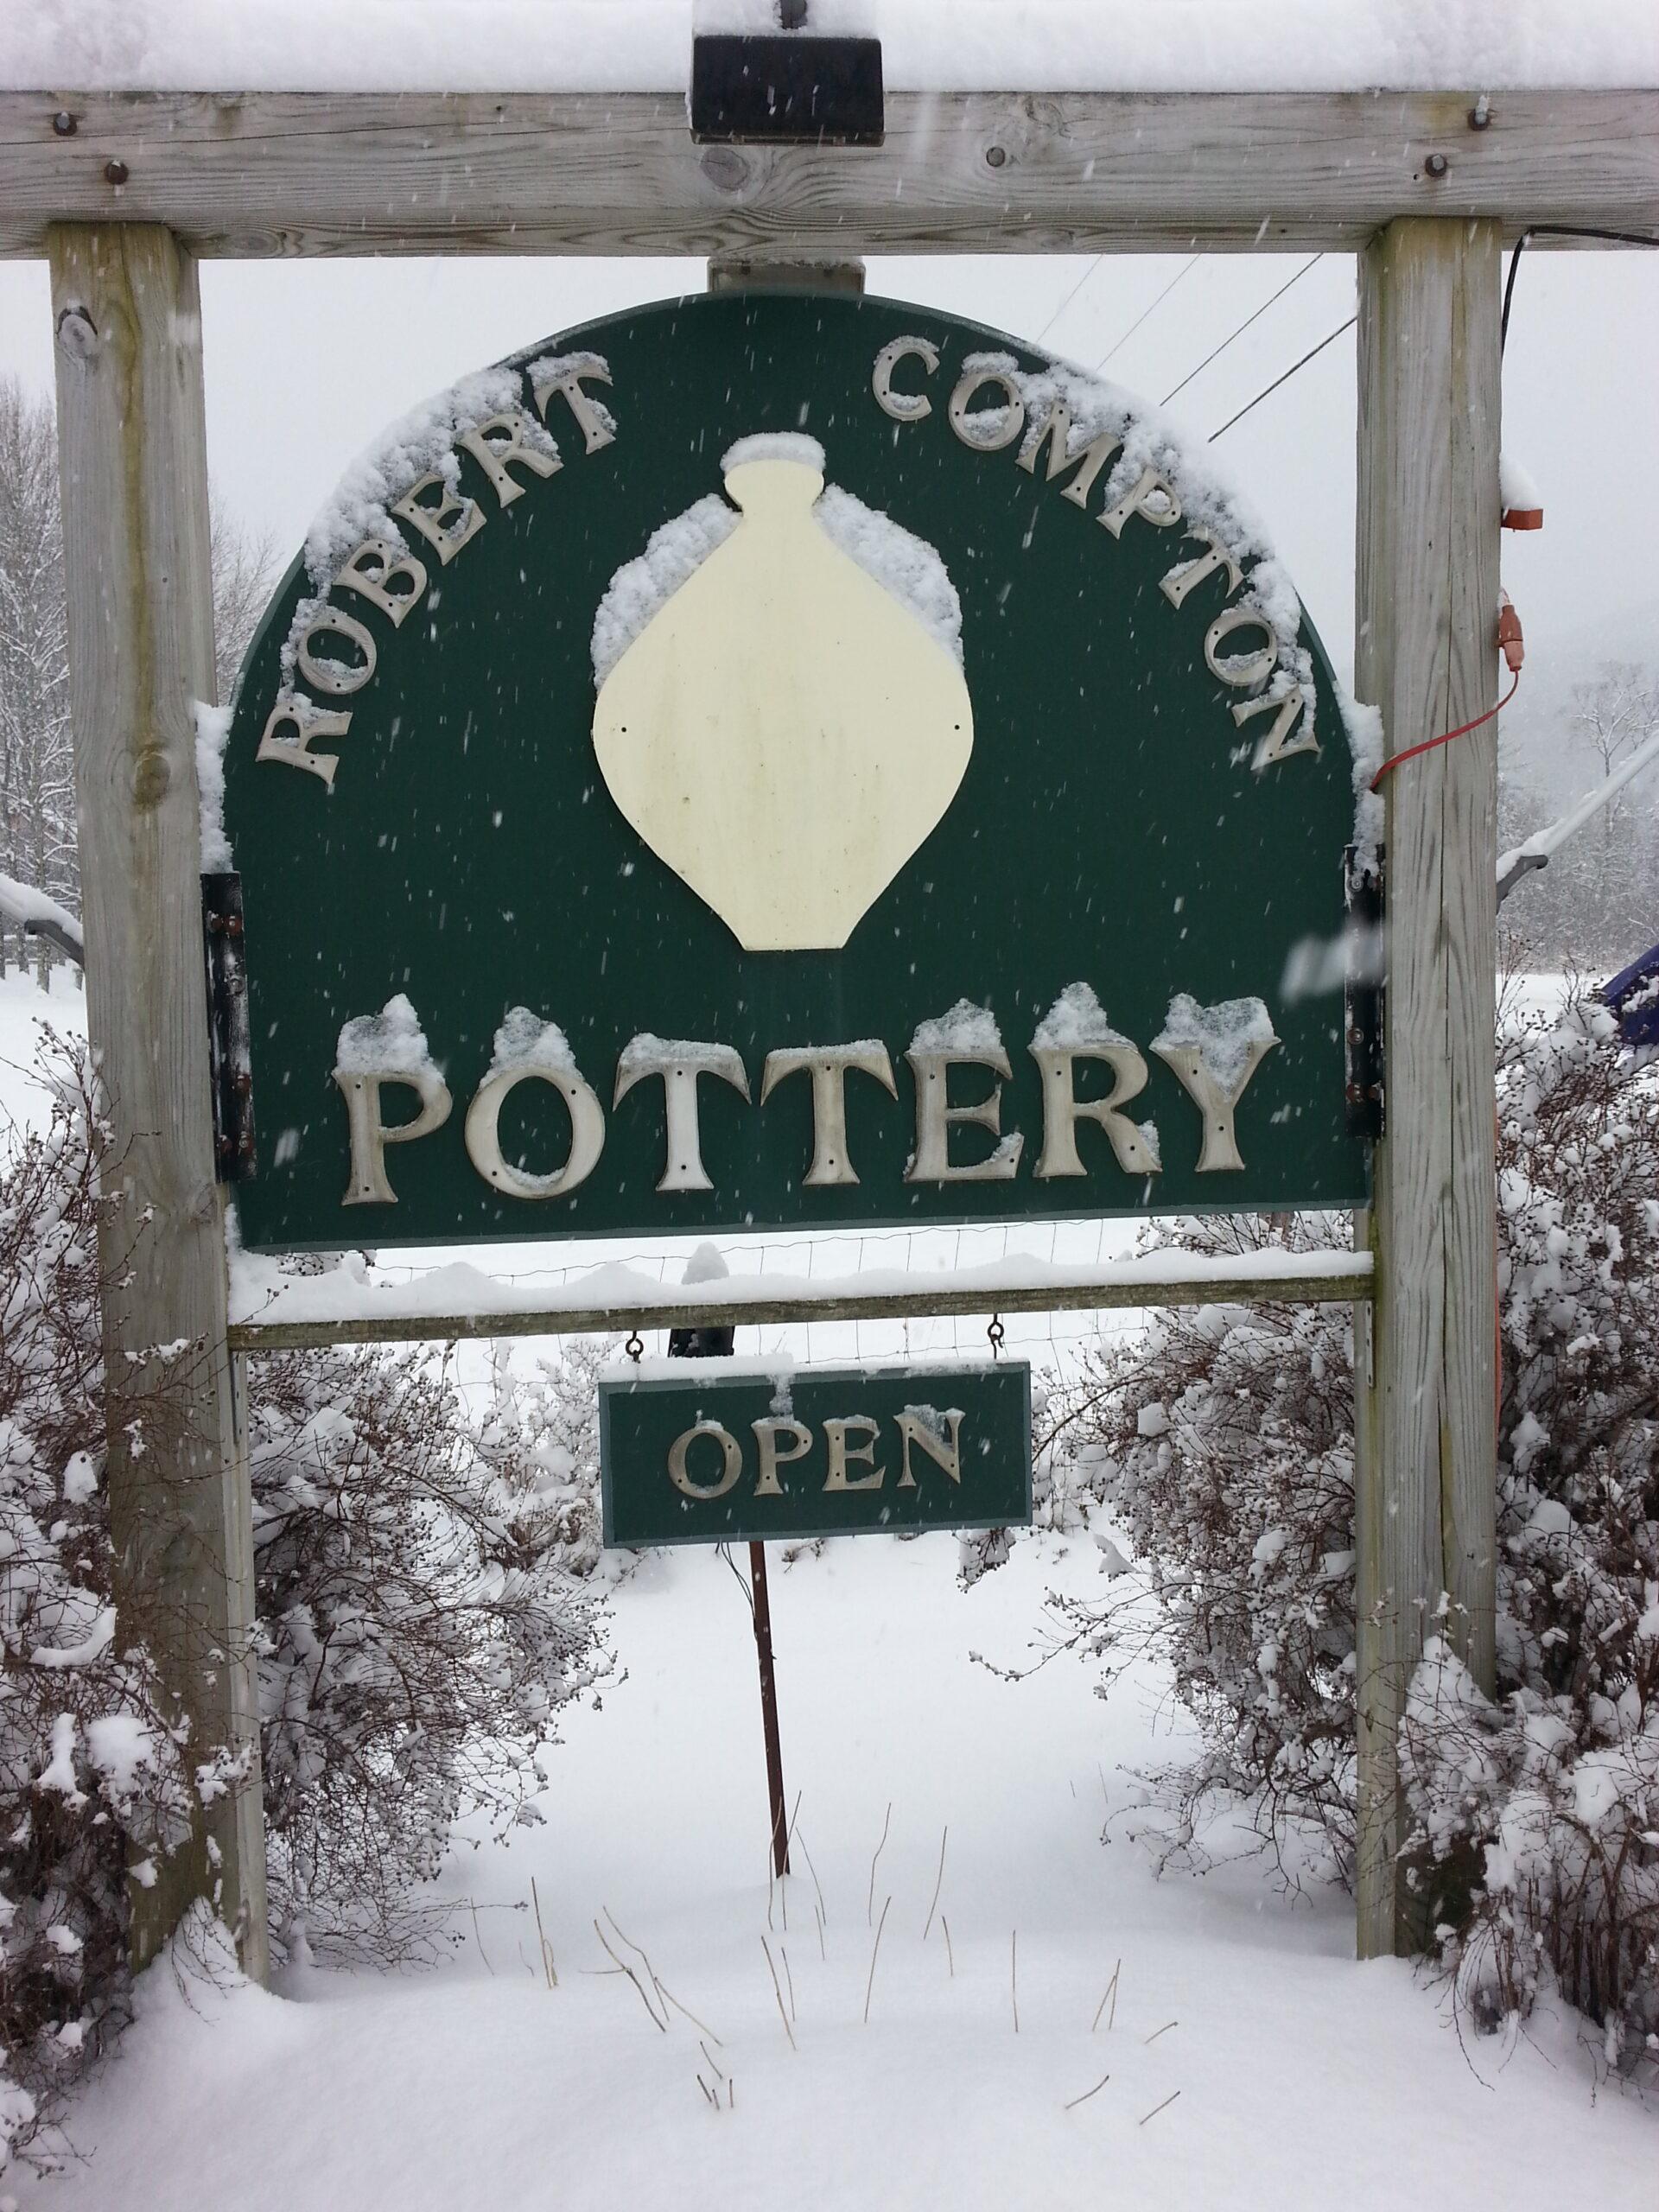 Our roadside pottery sign dusted with snow.